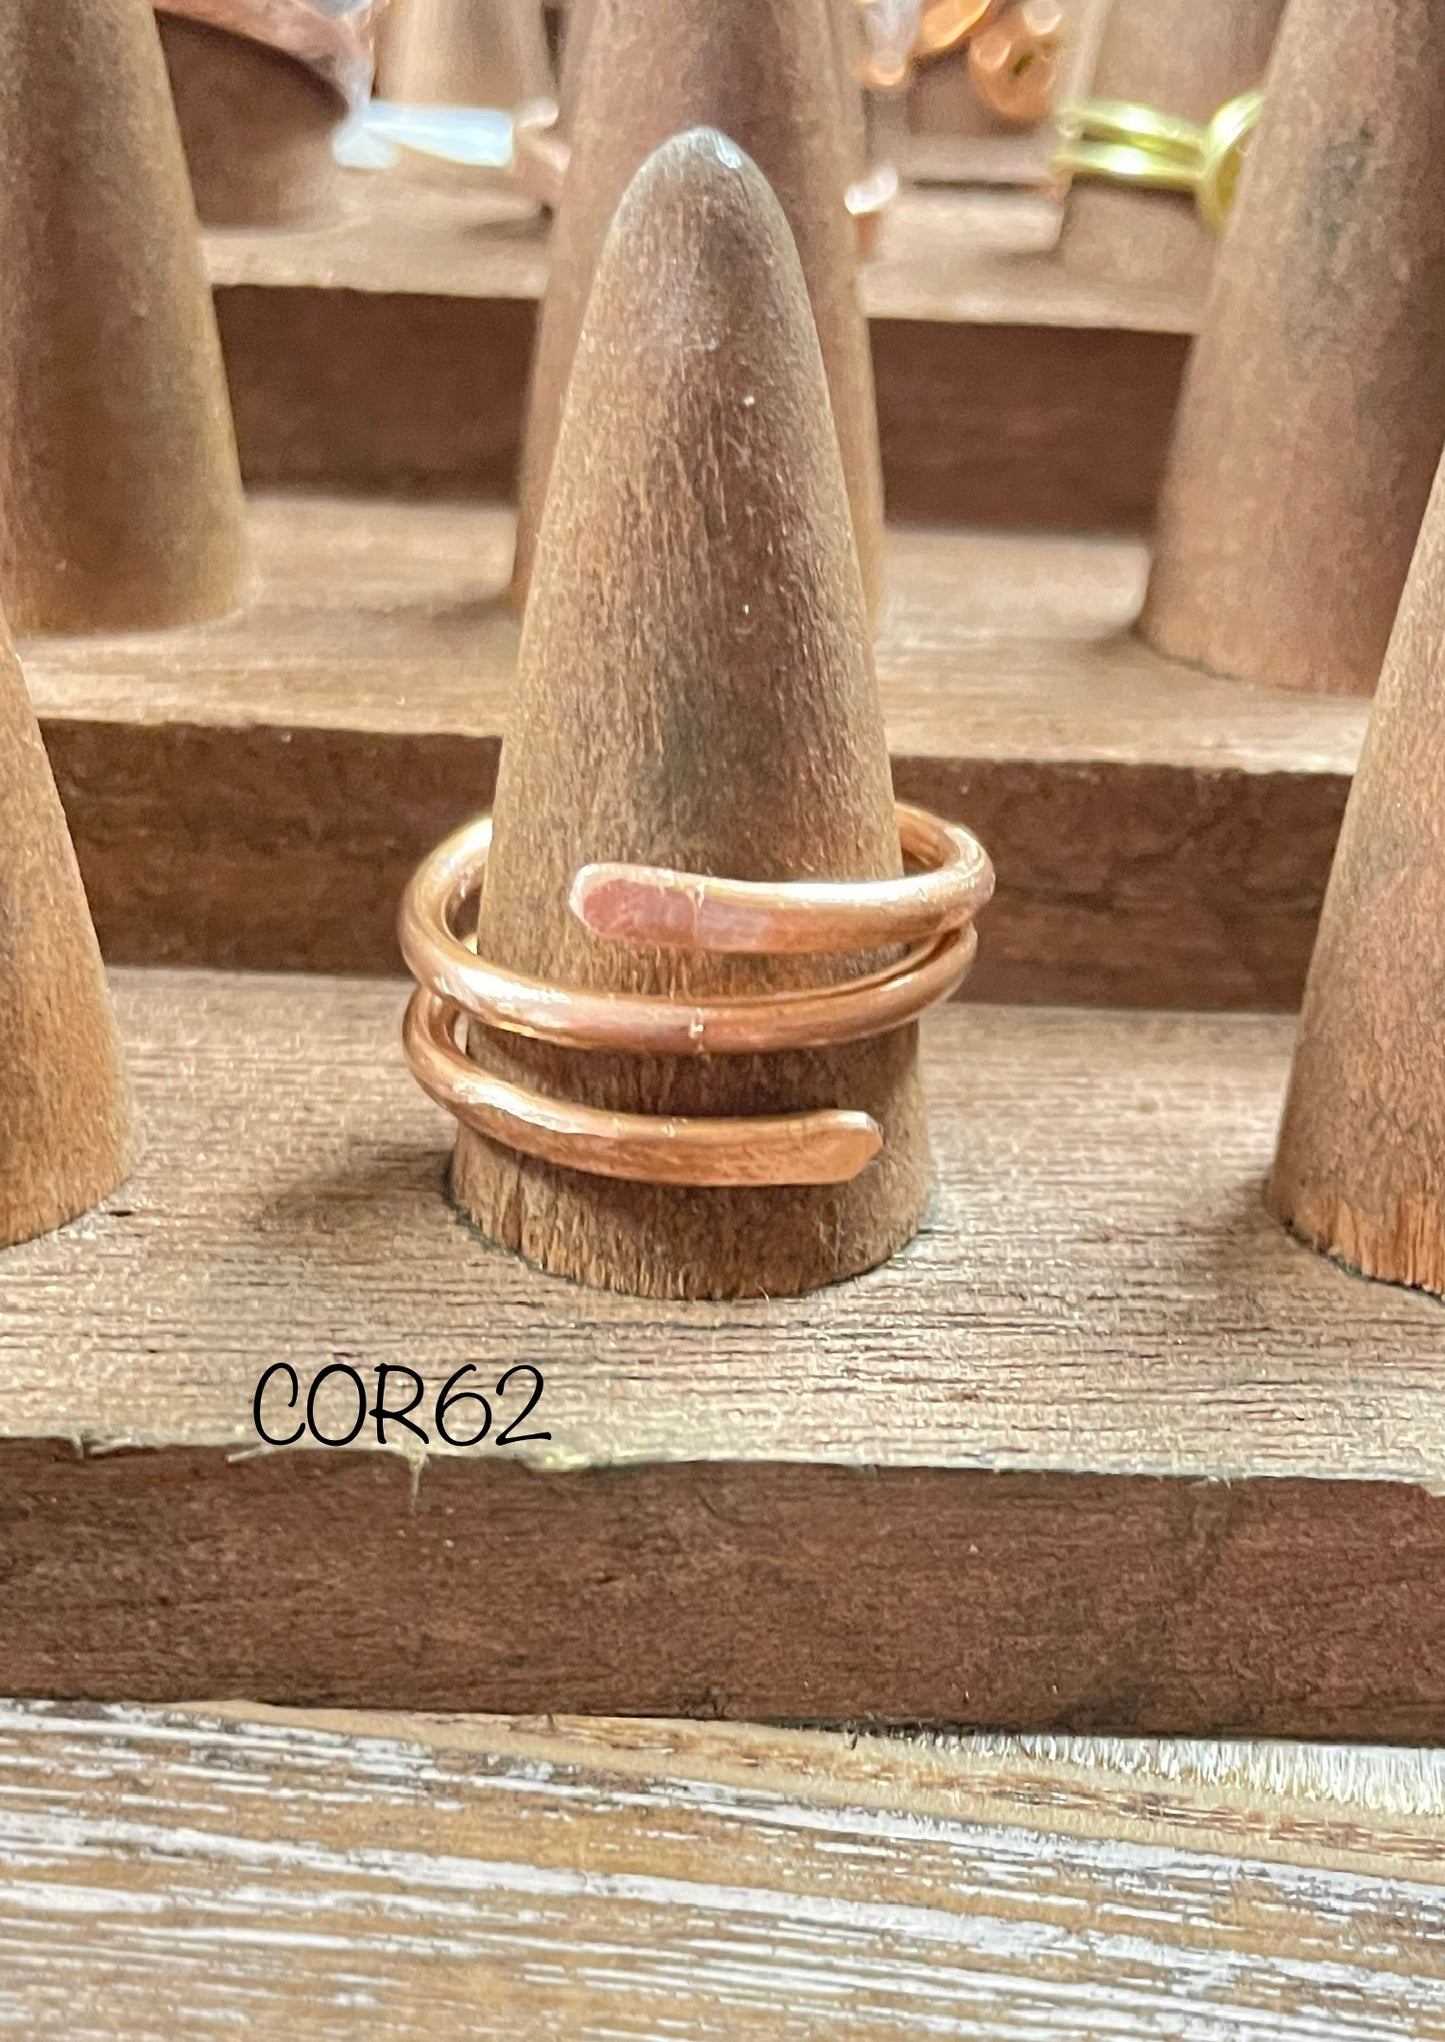 Copper Wrap Ring